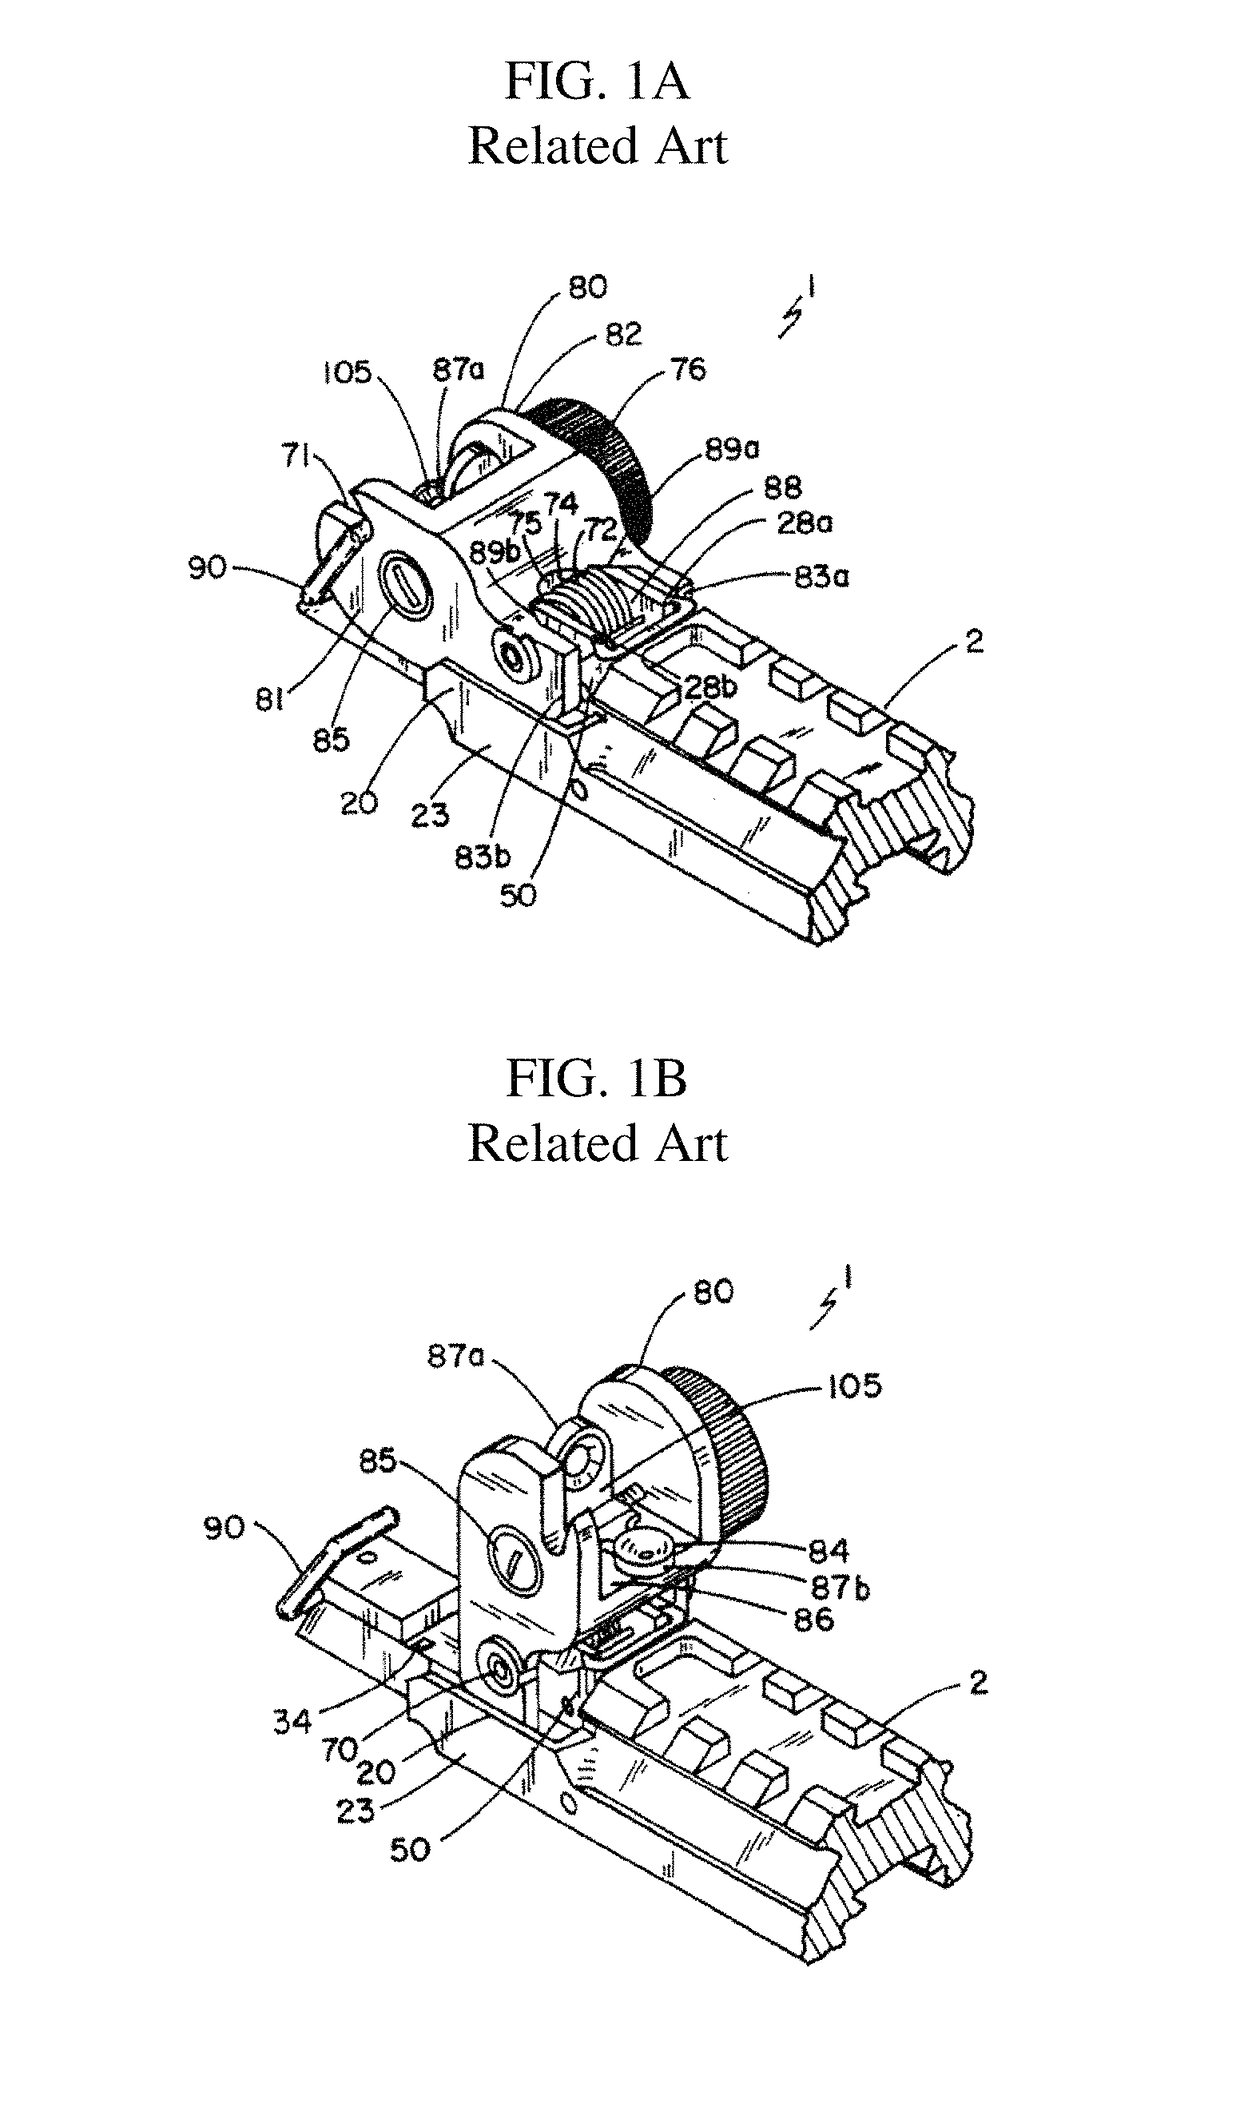 Collapsible reflective sight for a firearm